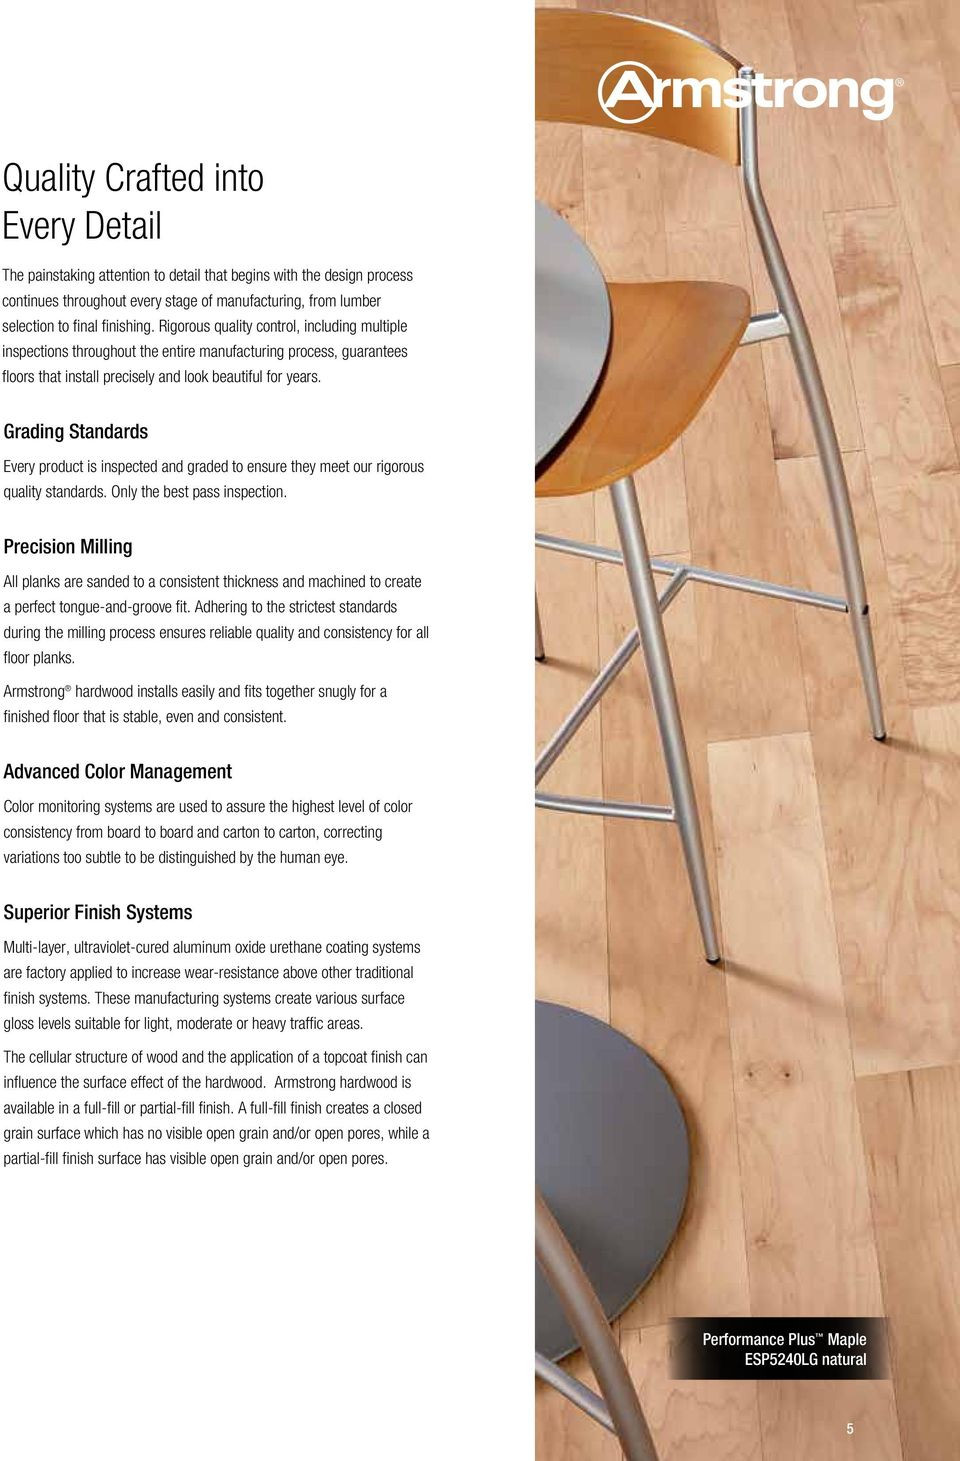 16 attractive Armstrong Hardwood Flooring Company 2024 free download armstrong hardwood flooring company of performance plus midtown pdf intended for grading standards every product is inspected and graded to ensure they meet our rigorous quality standards